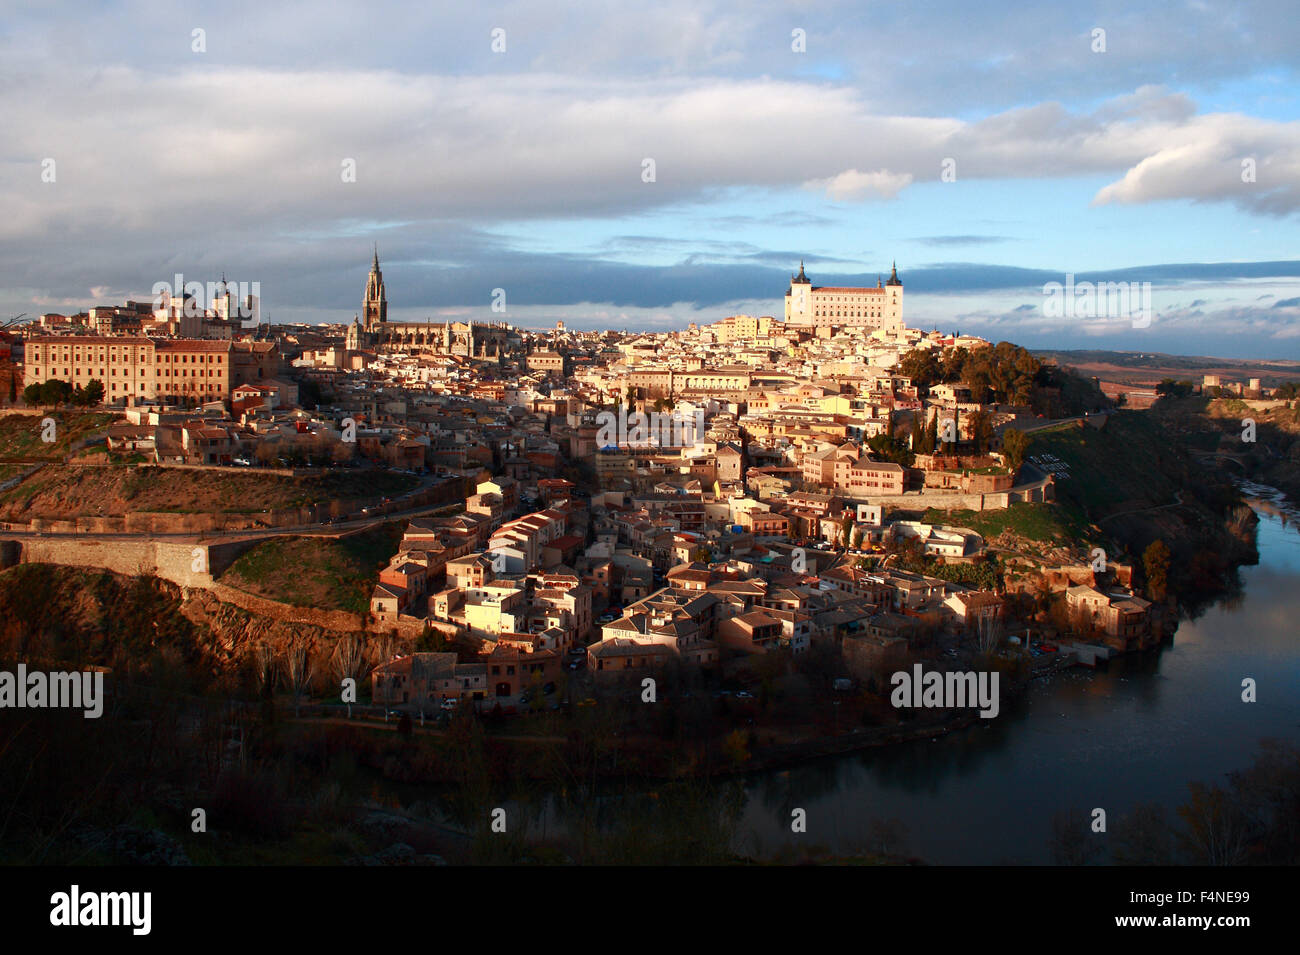 View of Toledo with the River Tagus surrounding it.  This city was declared a World Heritage Site by UNESCO. Stock Photo